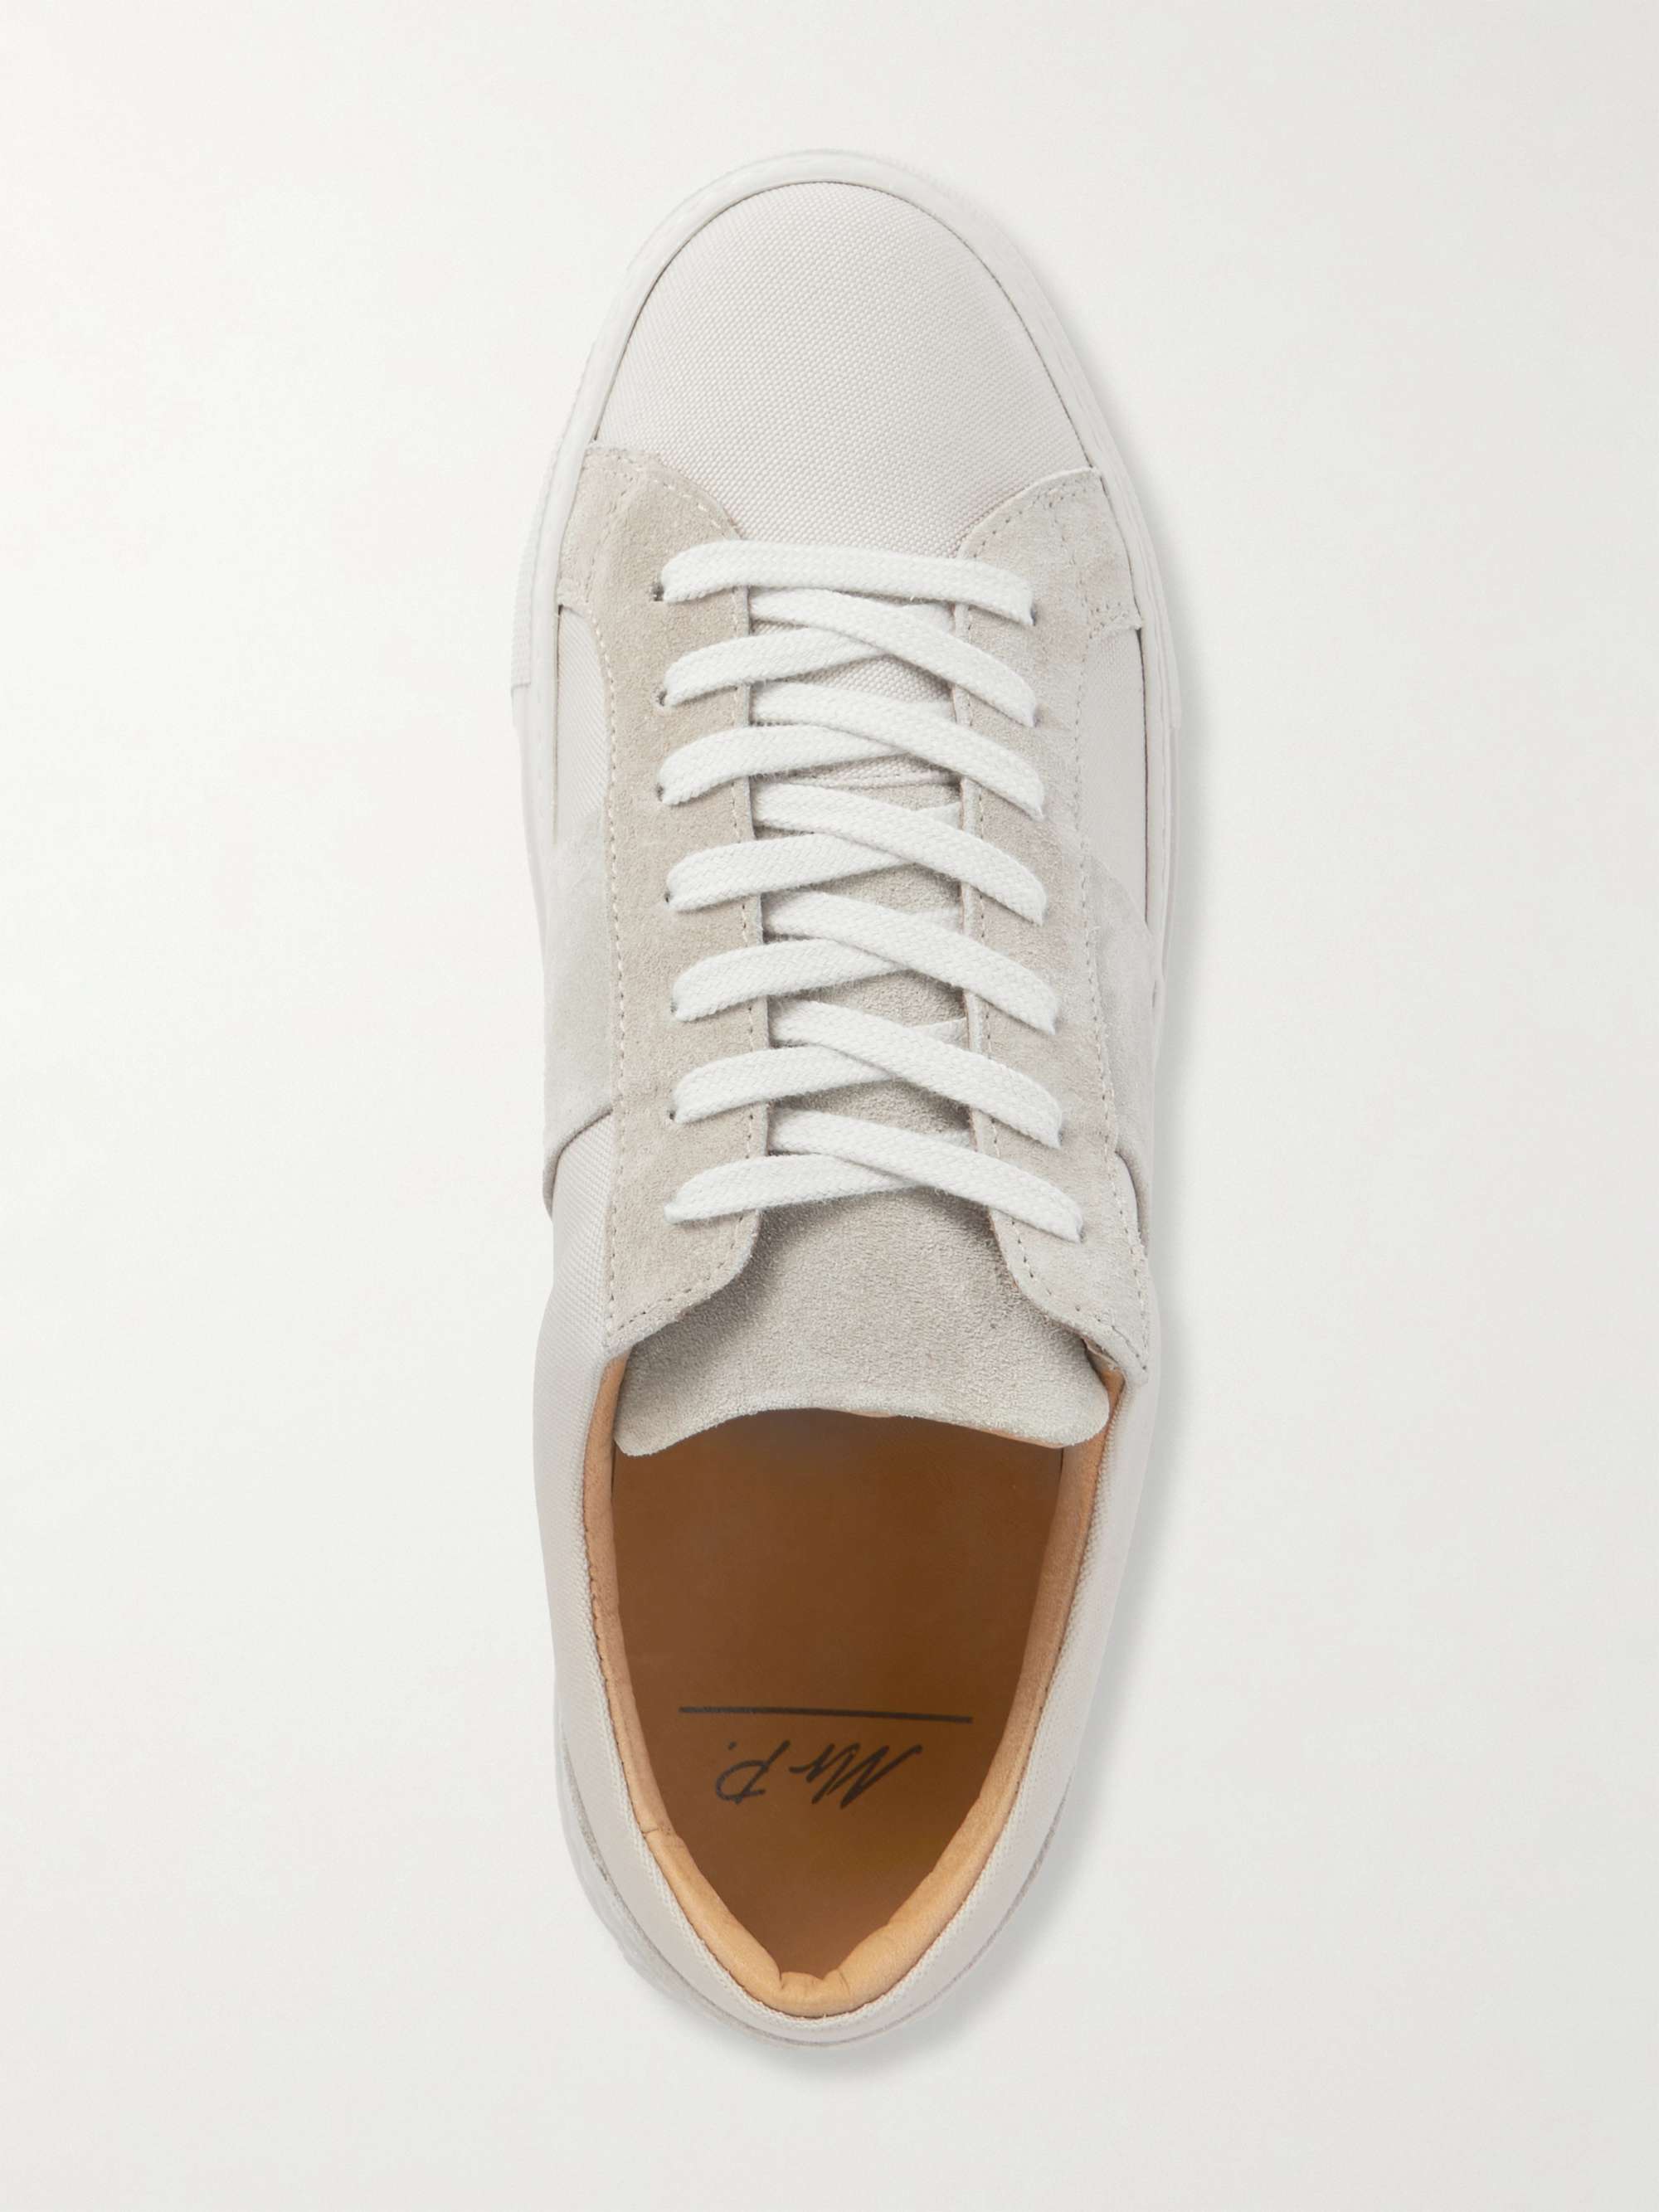 MR P. Suede-Trimmed Canvas Sneakers